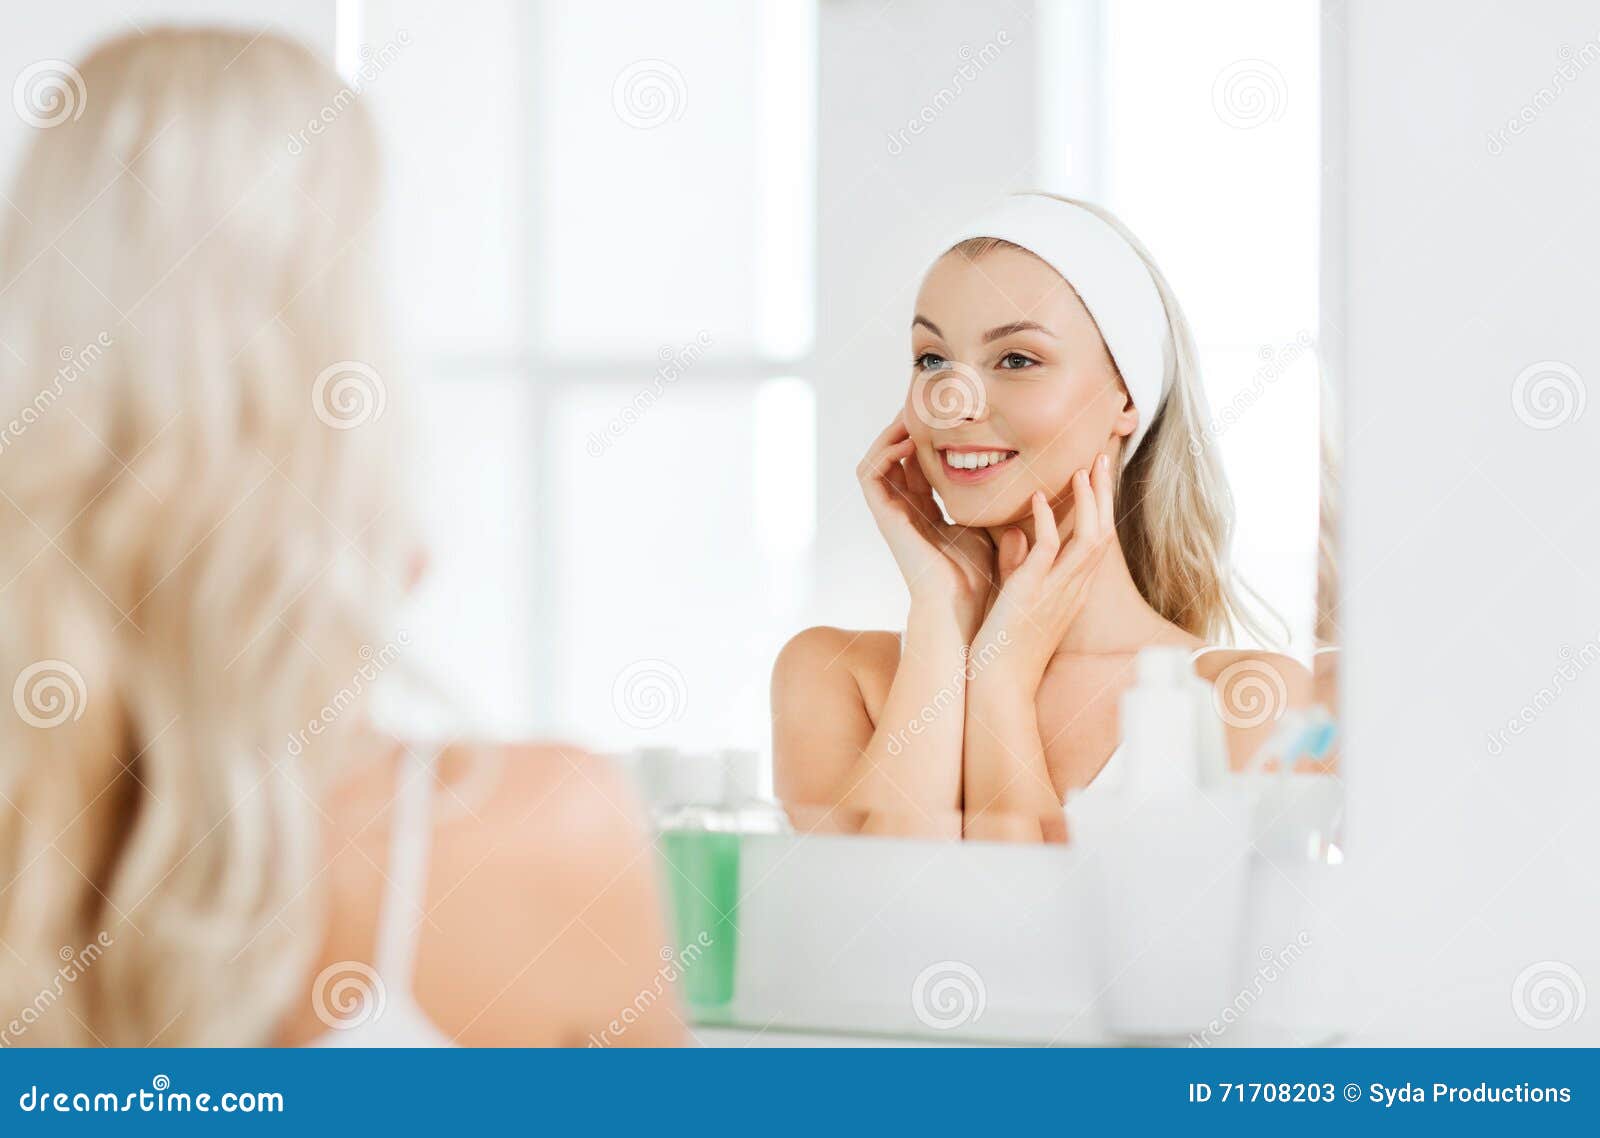 woman in hairband touching her face at bathroom